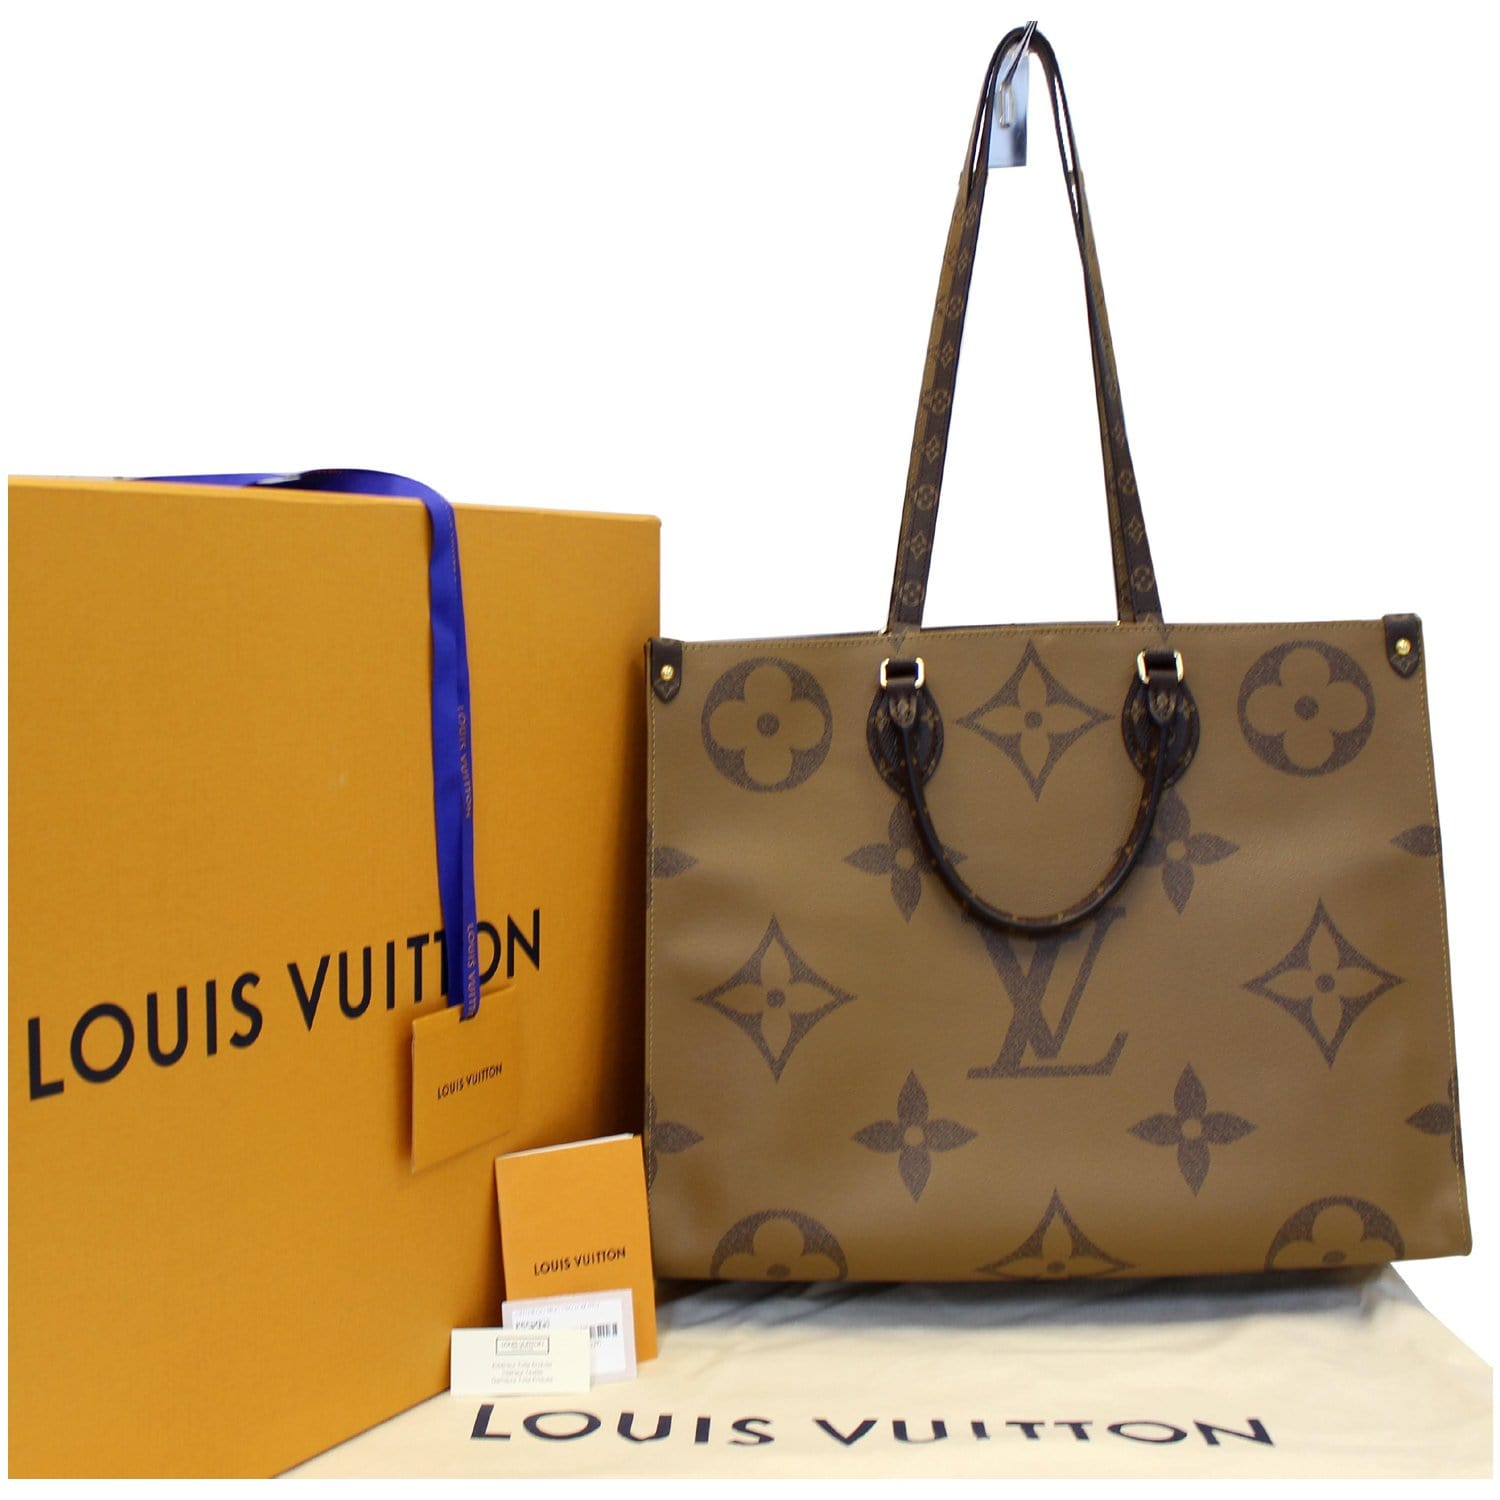 Room4fashion7 - Louis Vuitton onthego big bag available